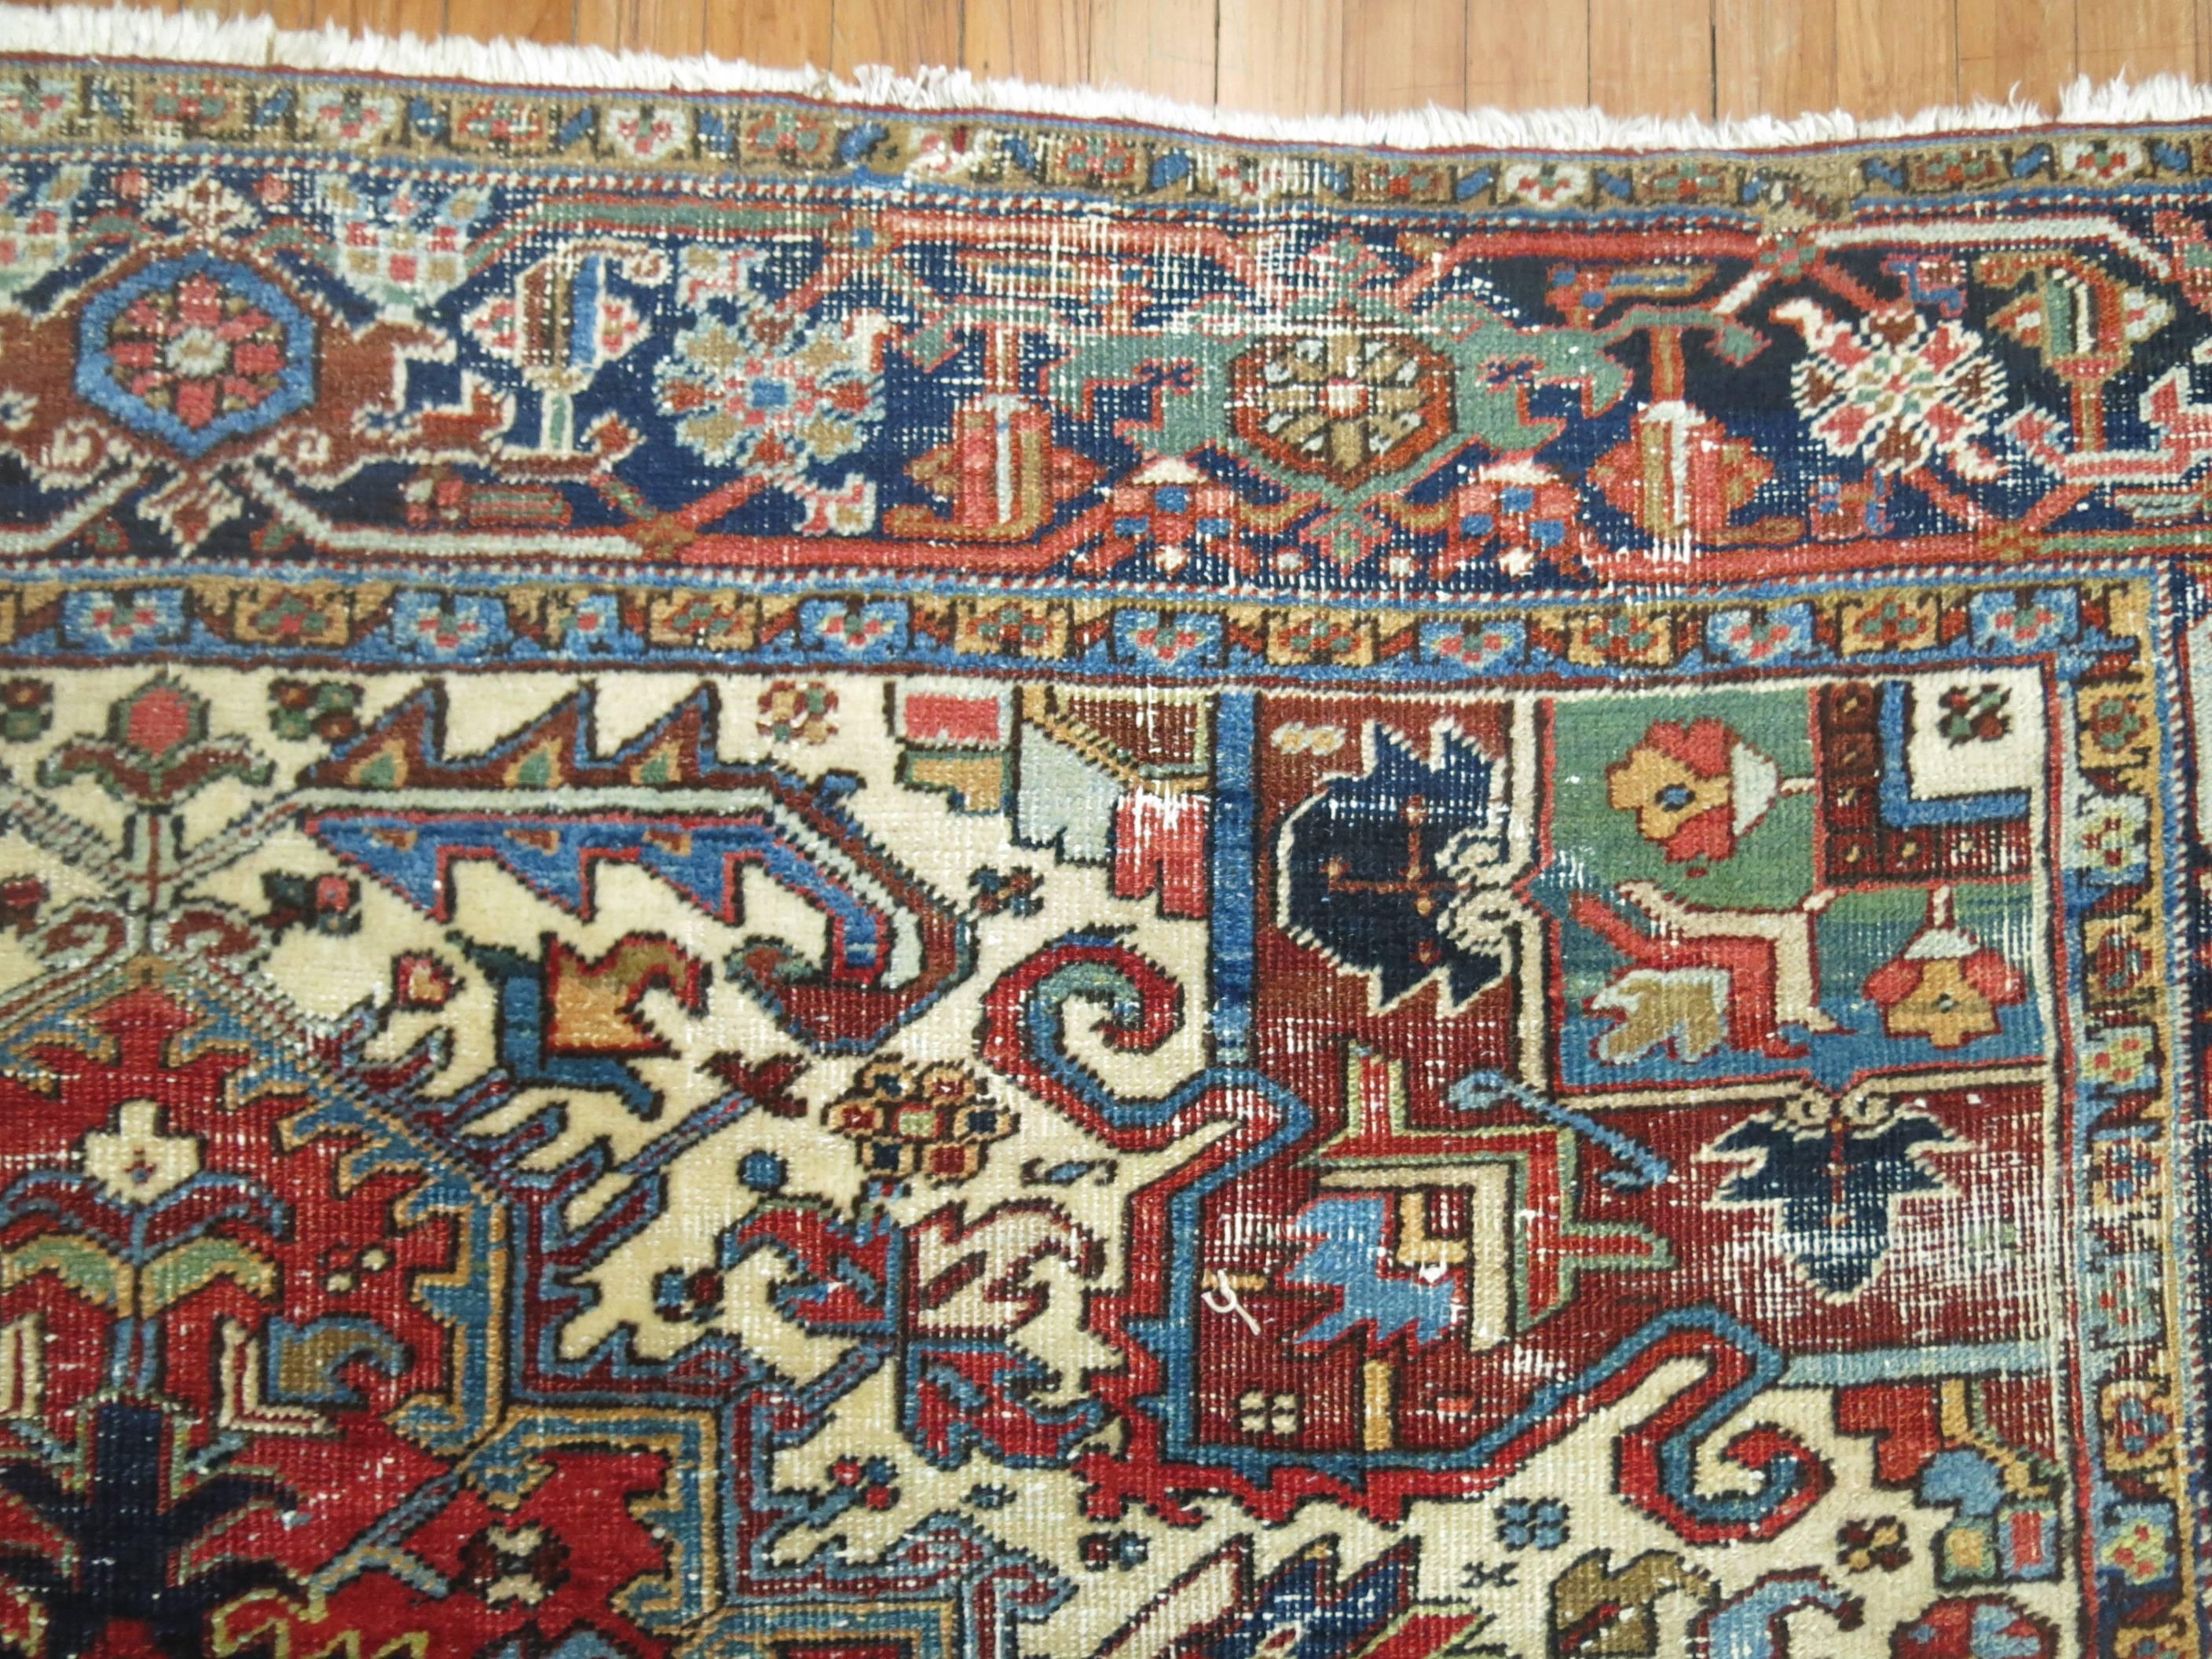 An early 20th century Classic Persian Heriz rug that has been distressed over time. Rug has been professionally cleaned. No holes, stains and can withstand everyday traffic.

Measures: 8'2”x 10'8”.